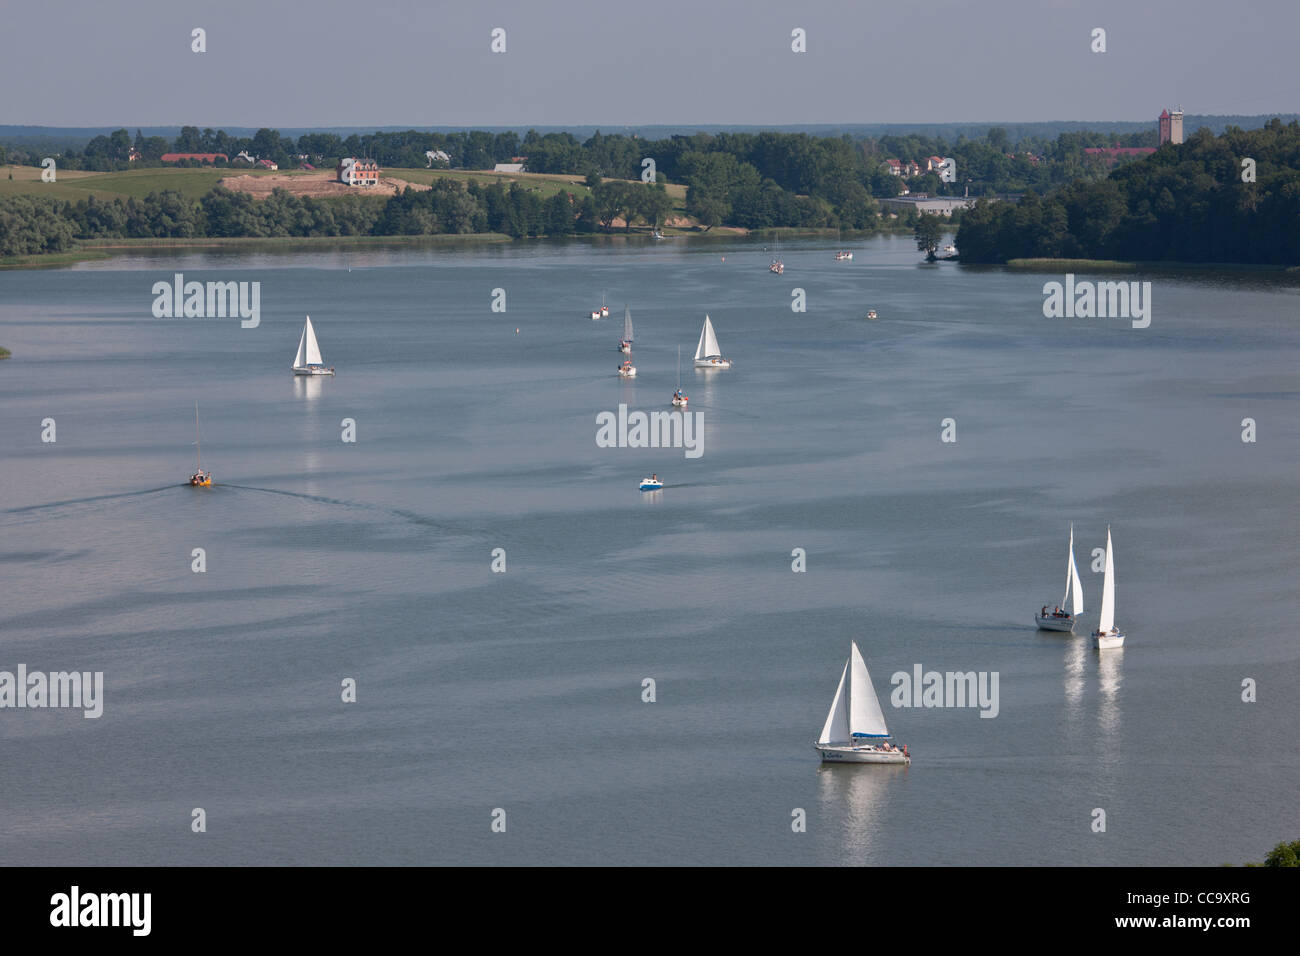 View from the flight of the lake, 'Talty' in Masuria. On the water sail boats and yachts, and in the distance town 'Mikolajki' Stock Photo